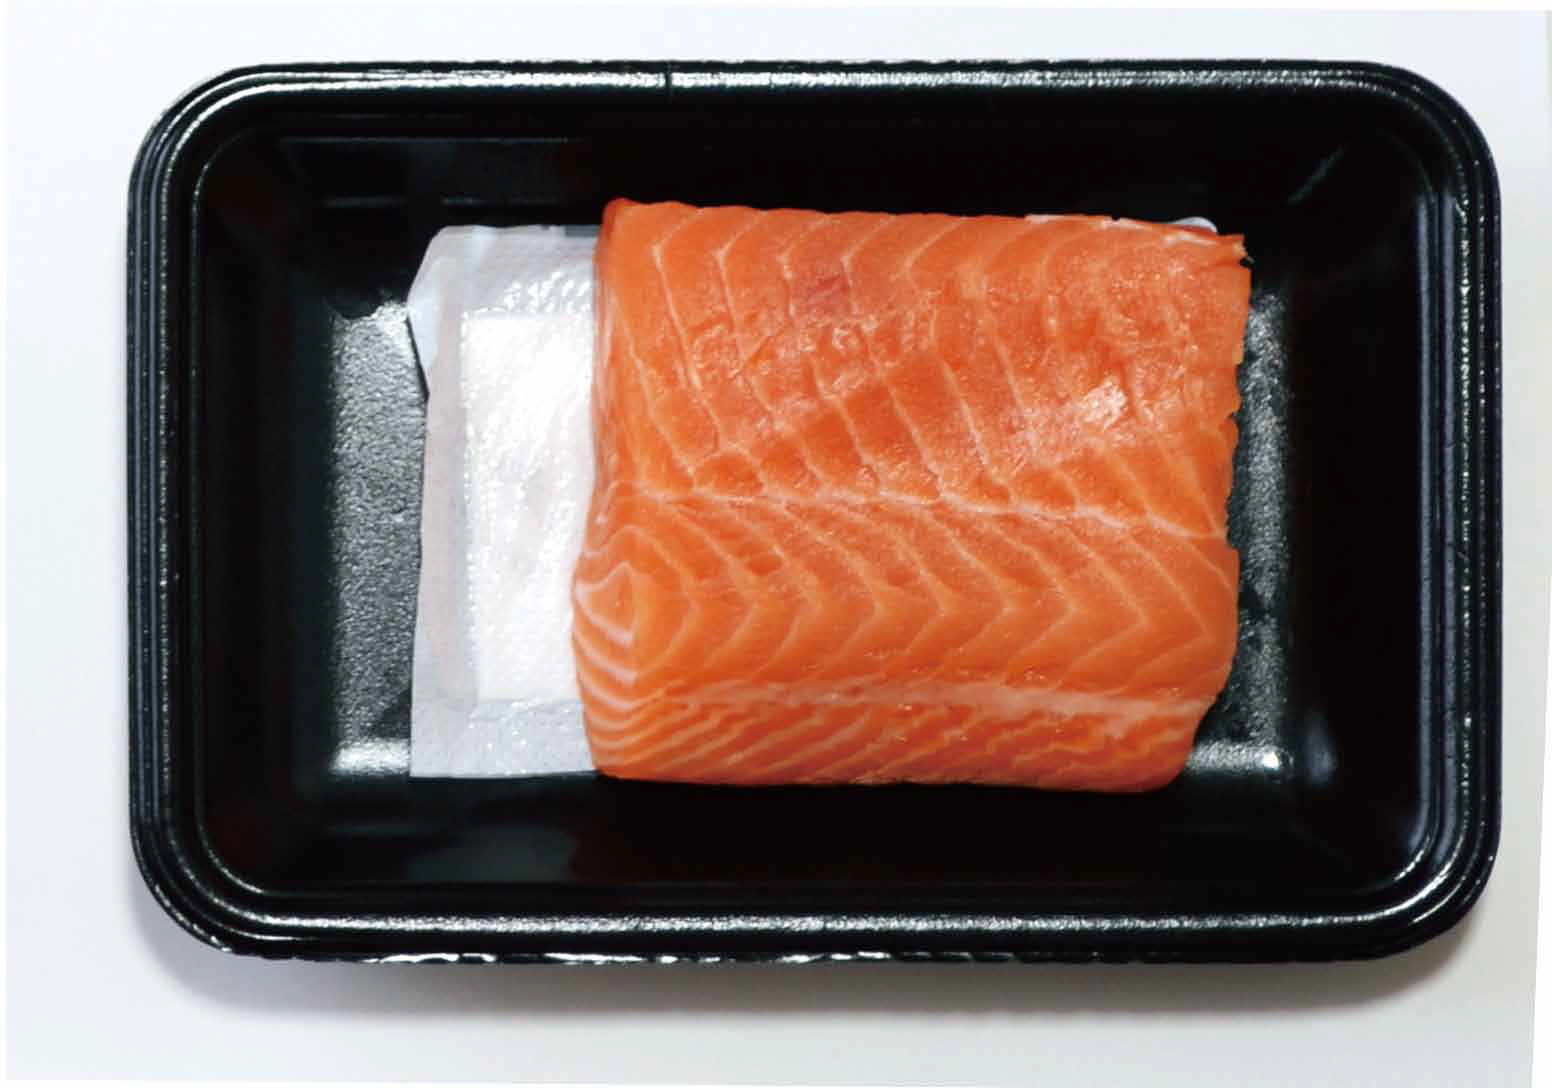 leak-free Absorbent sushi pads design to ensure the best possible food. for cut fish fillets